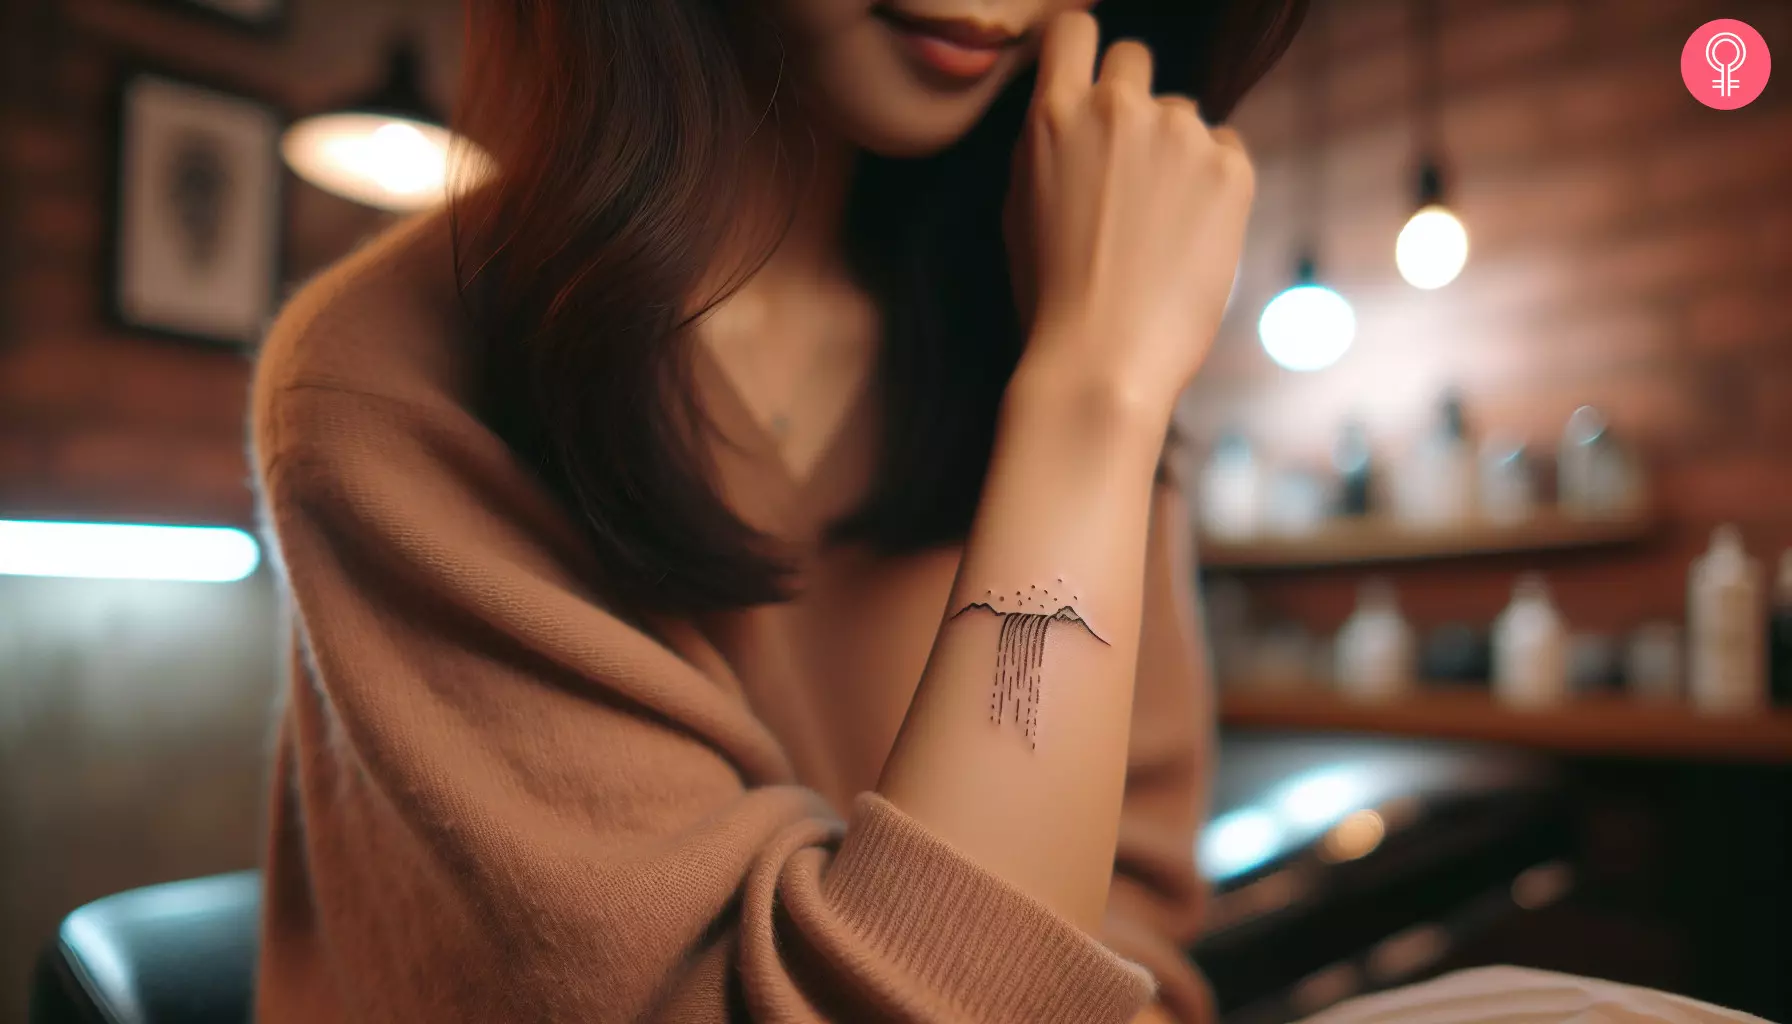 A minimalist simple waterfall tattoo on the forearm of a woman